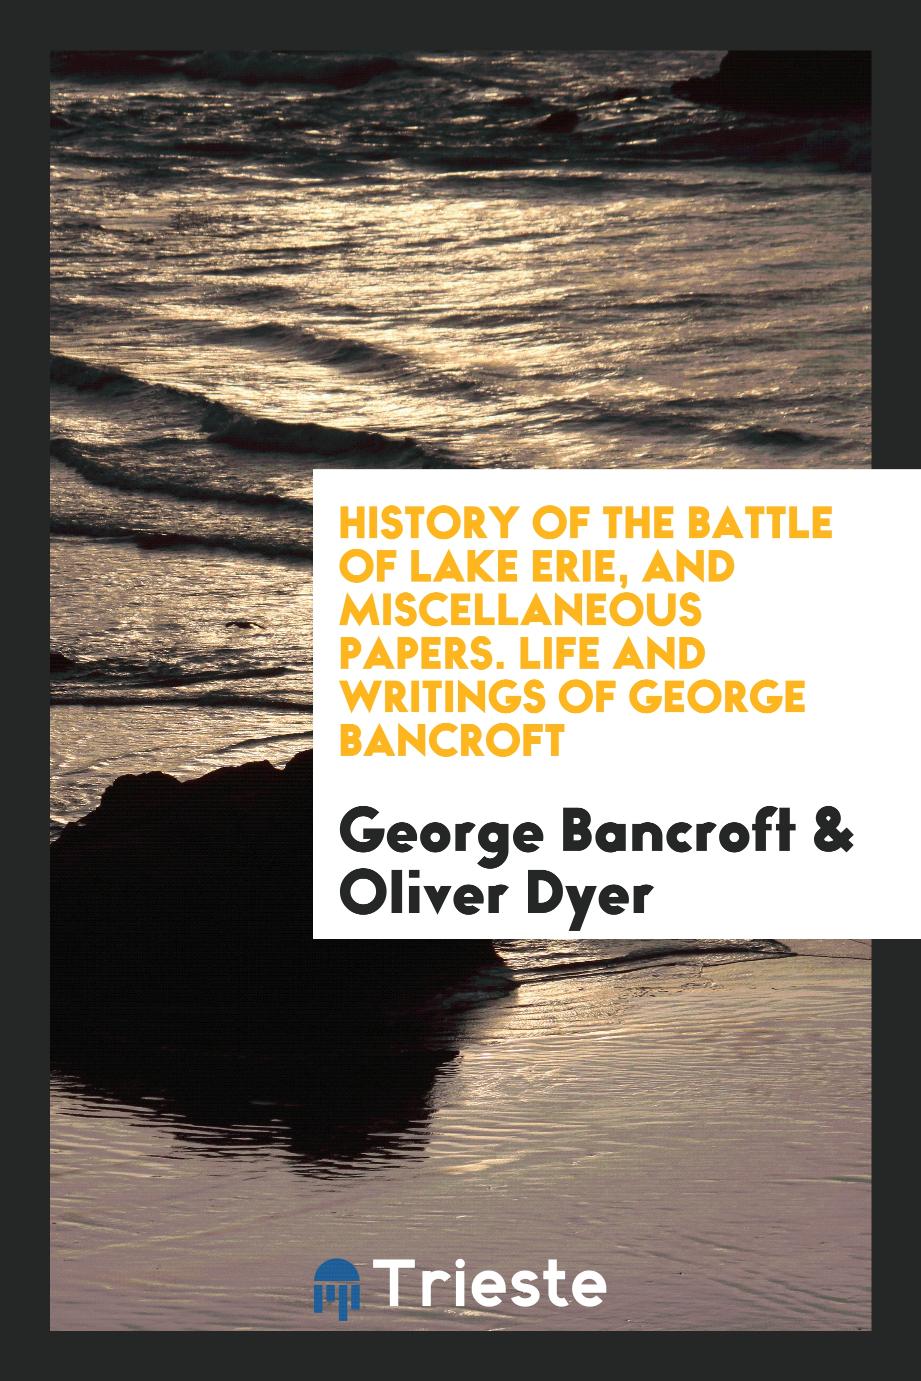 History of the Battle of Lake Erie, and Miscellaneous Papers. Life and Writings of George Bancroft